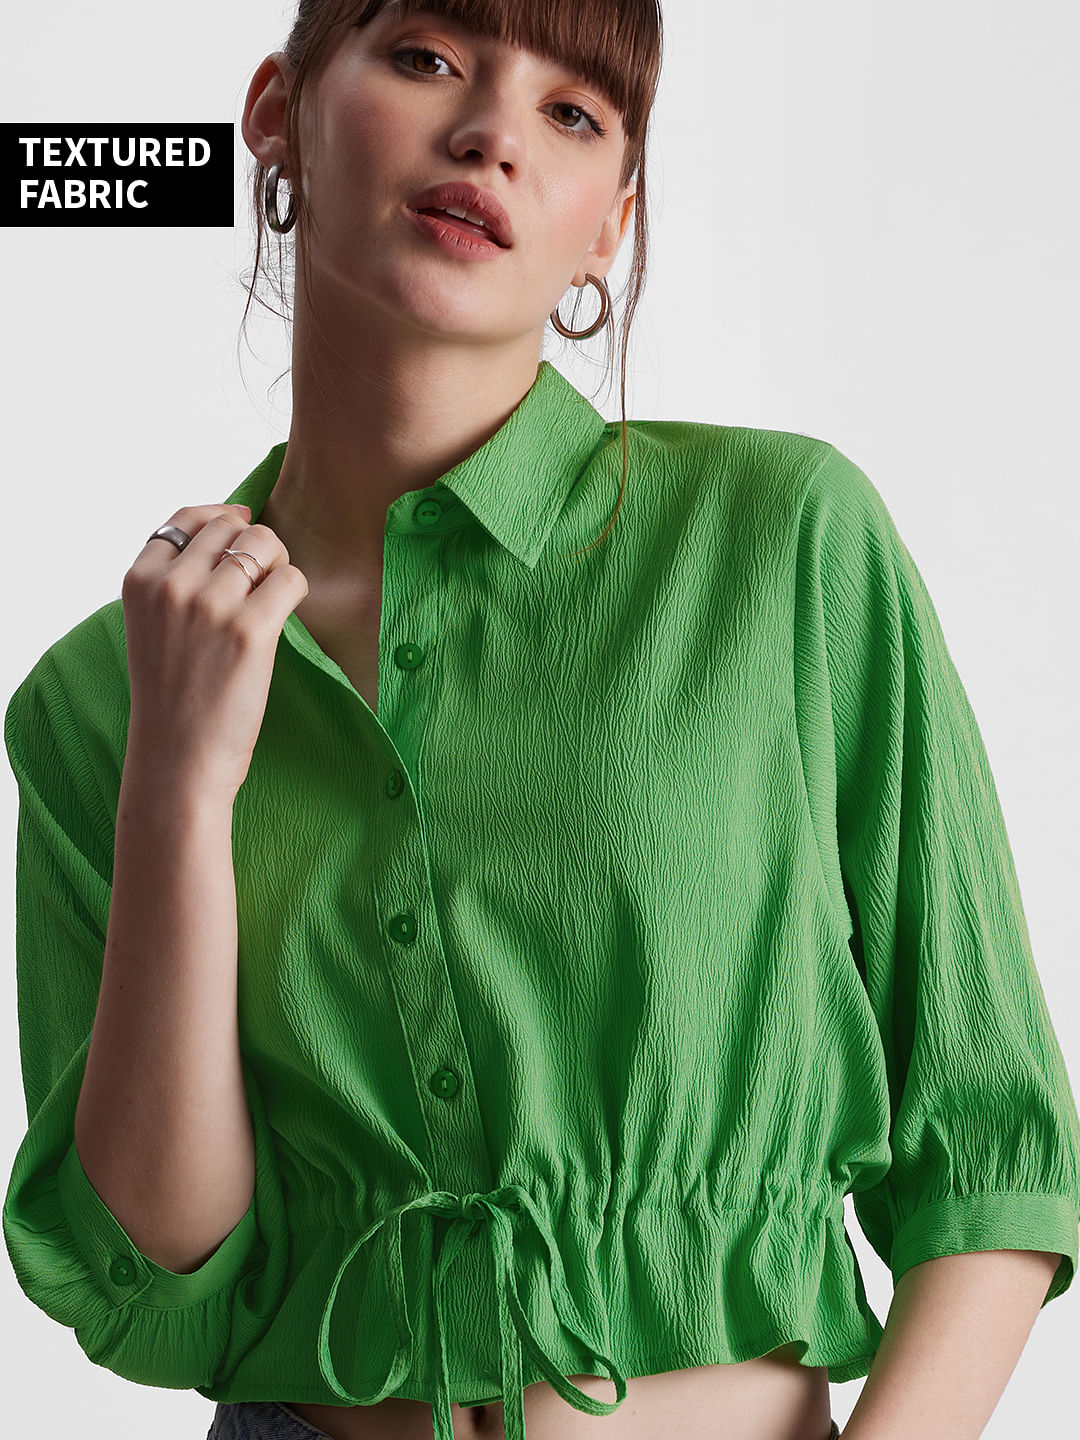 Buy Solids: Groovy Green Women Shirts Online at The Souled Store.